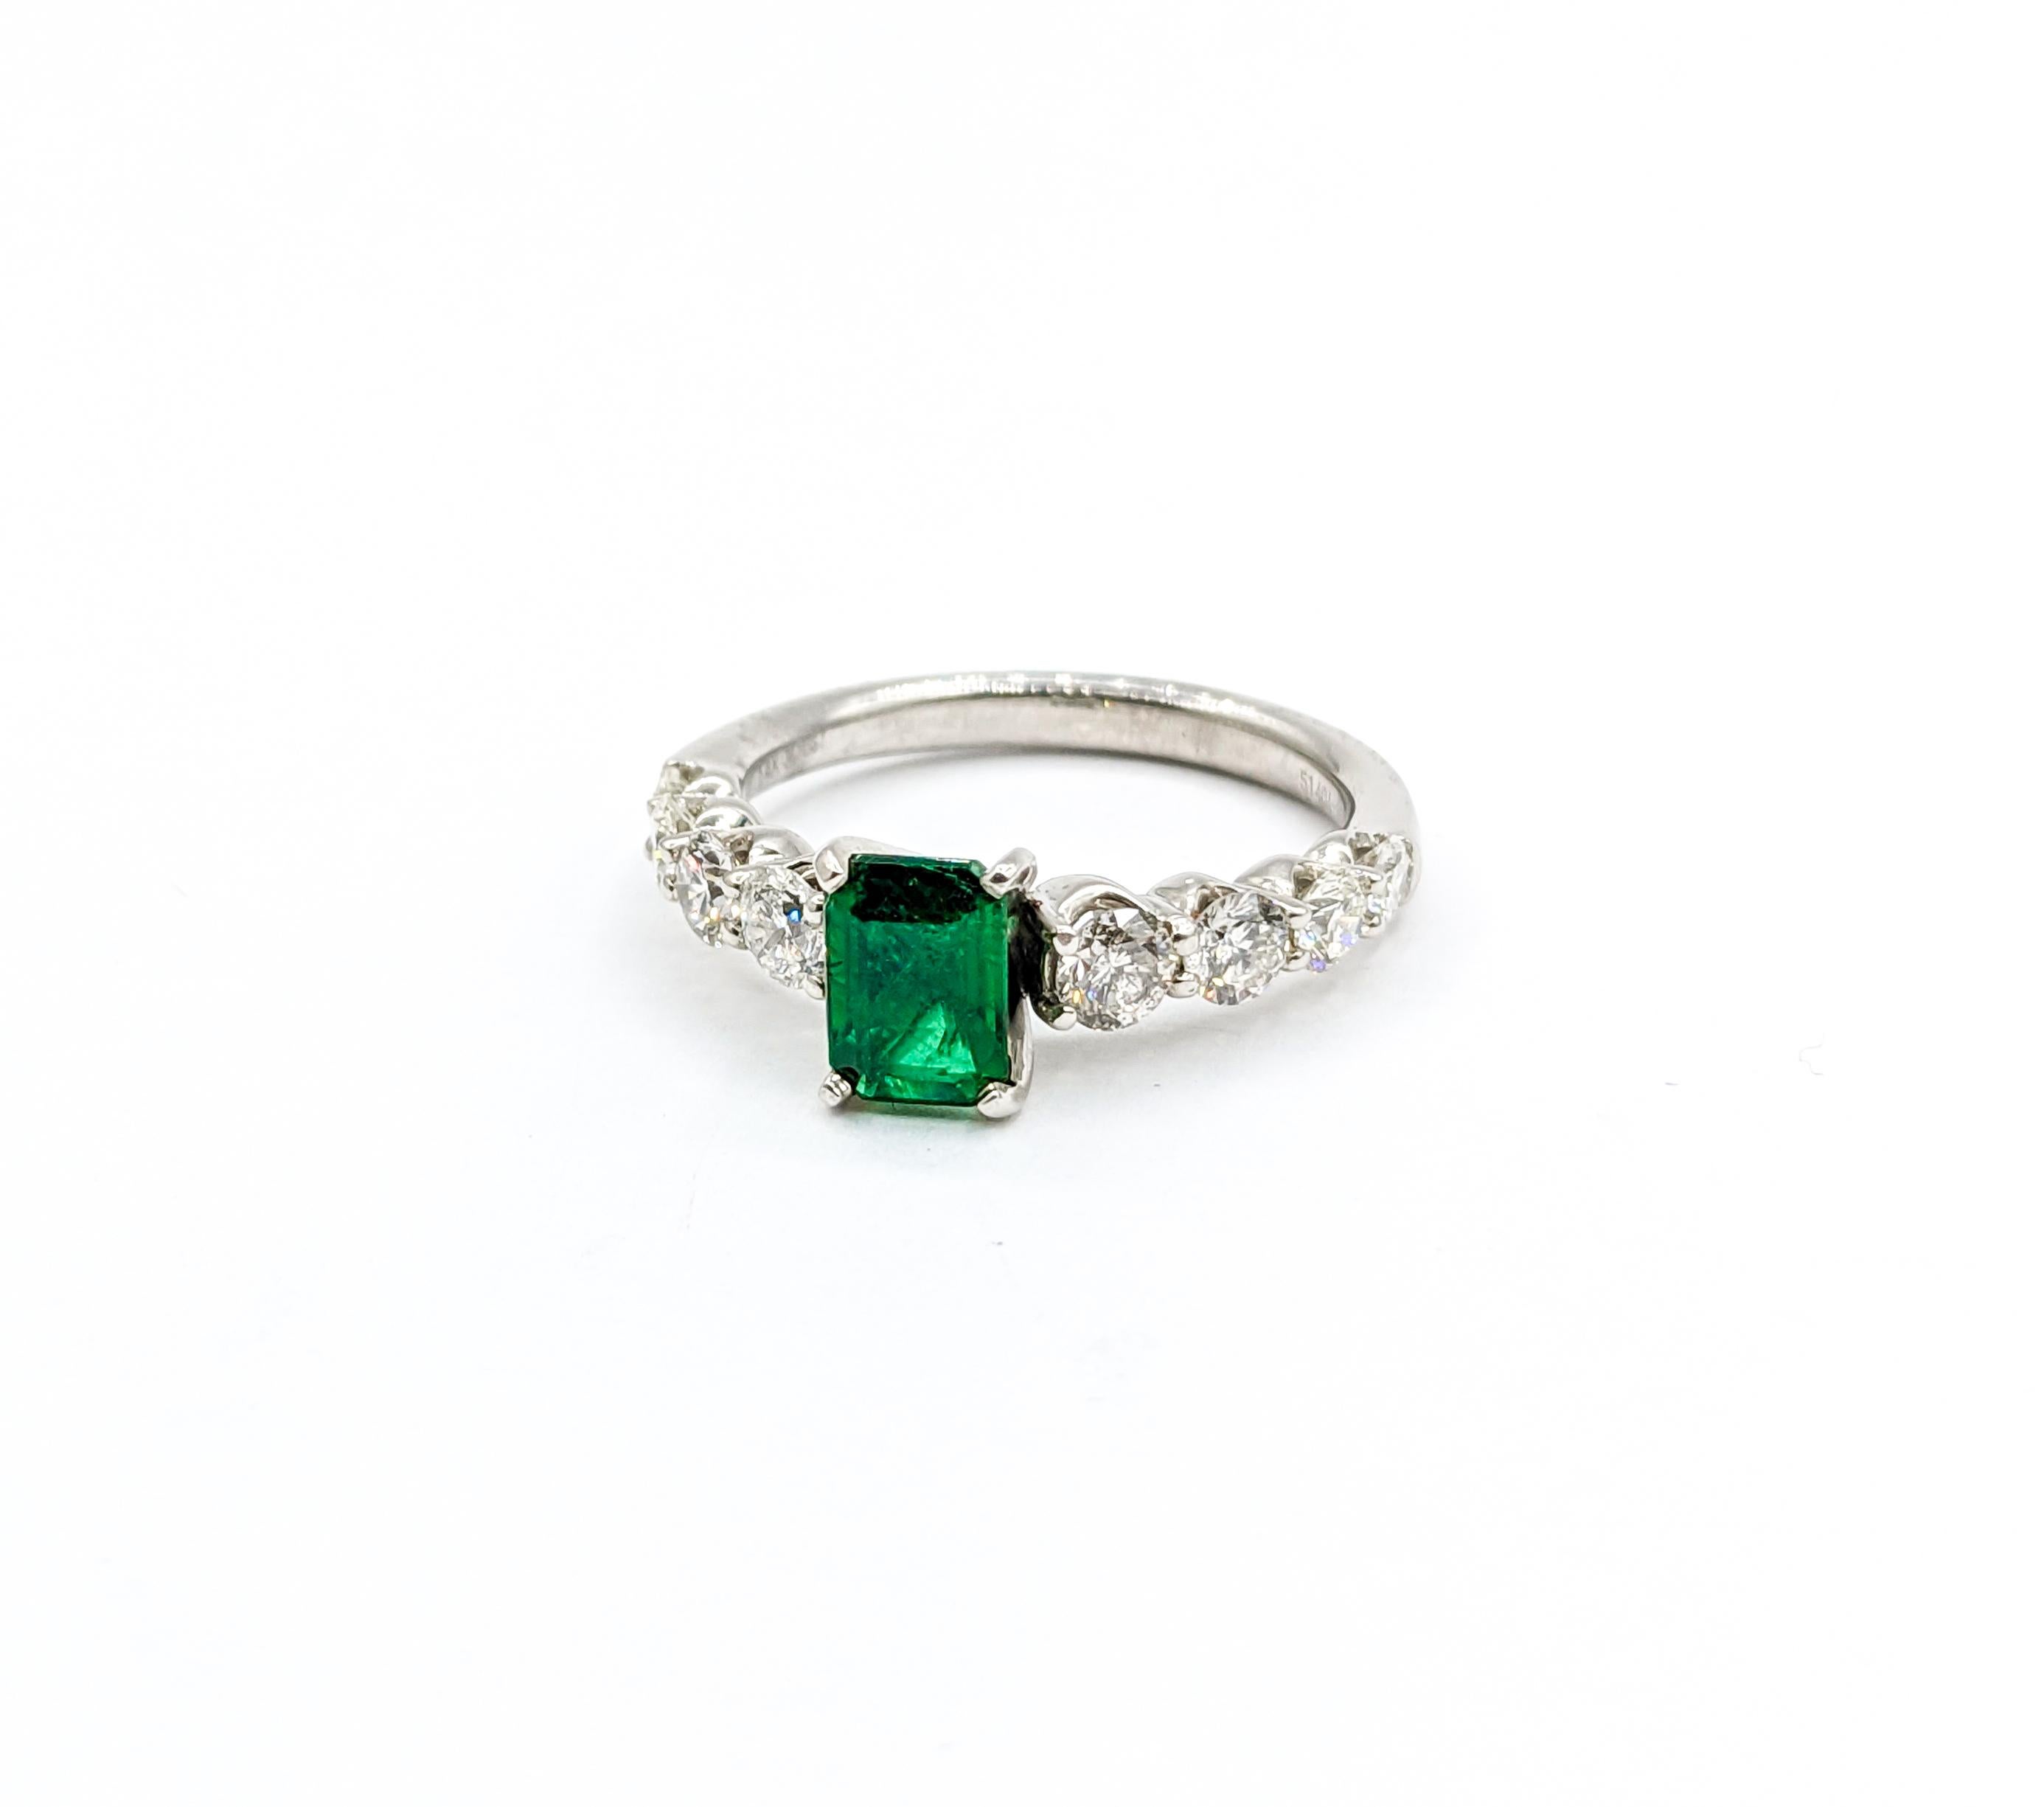 Stunning Emerald and Graduated Diamond Ring in 14K White Gold

Adorn your finger with this exquisite emerald ring crafted from 14k white gold. This ring features a stunning .89ct emerald, adding a pop of vibrant green color and sophistication. In